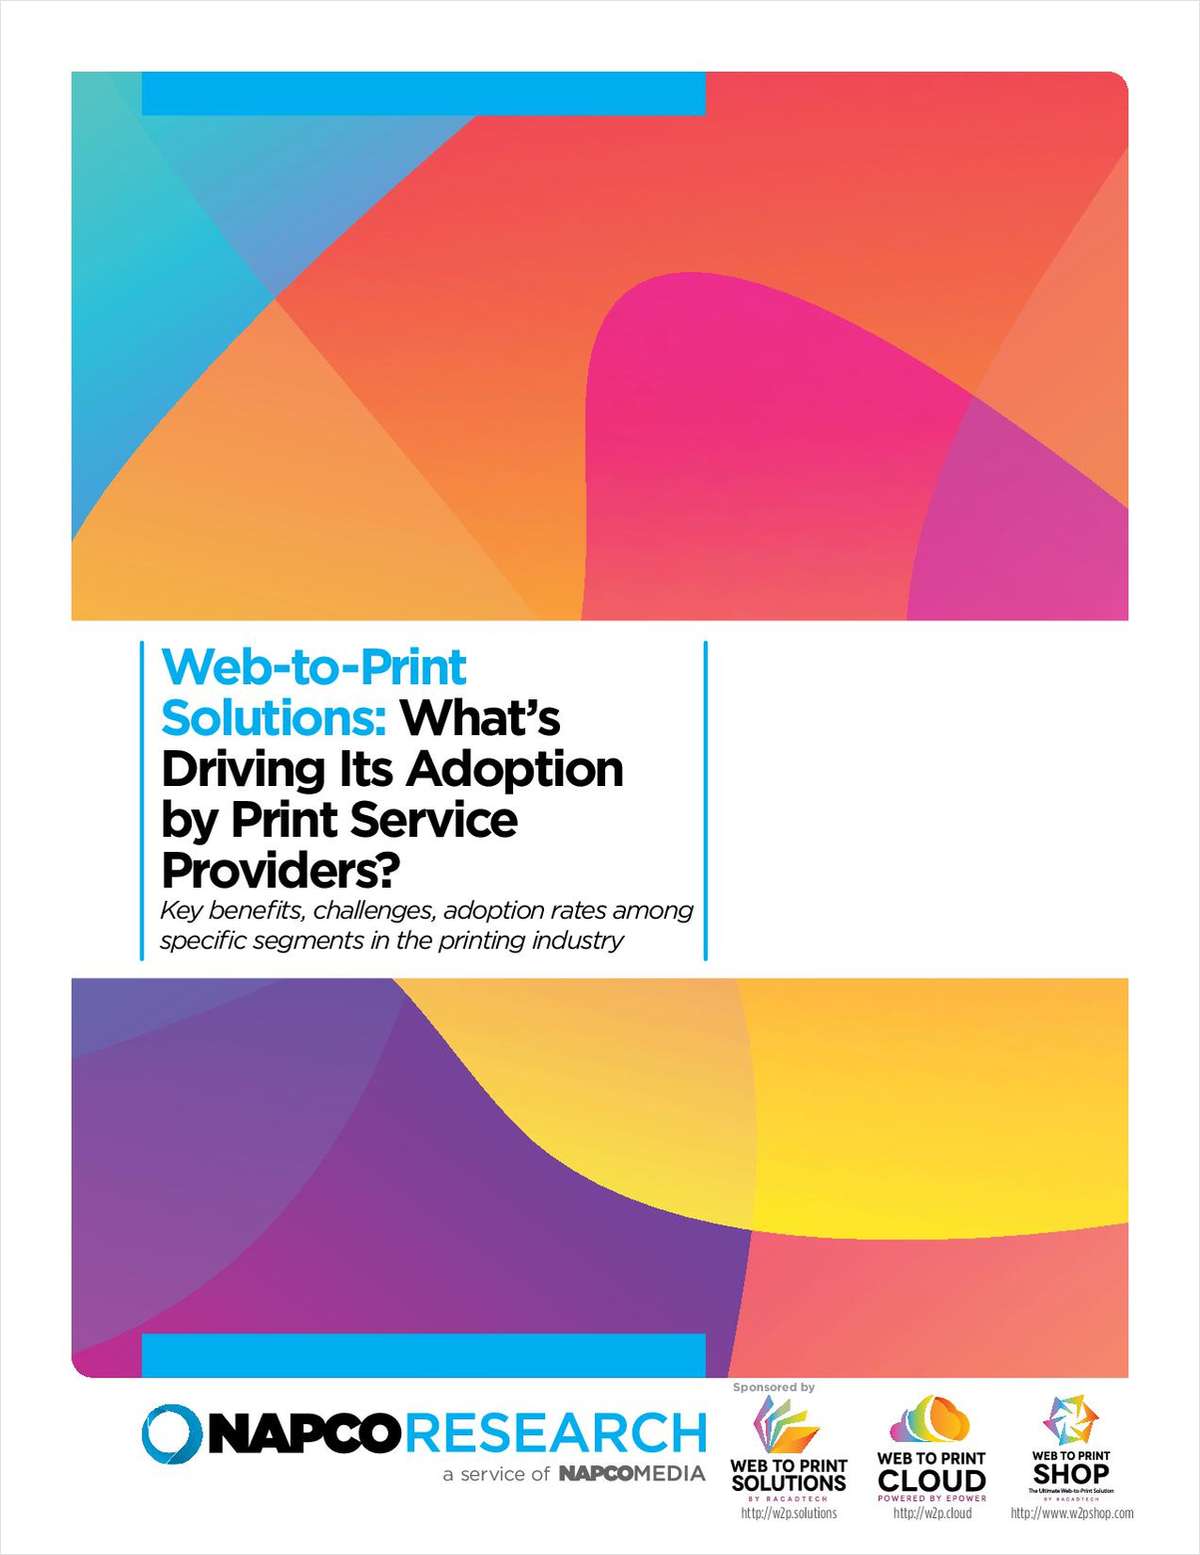 Web-to-Print Solutions: What's Driving Its Adoption by Print Service Providers?